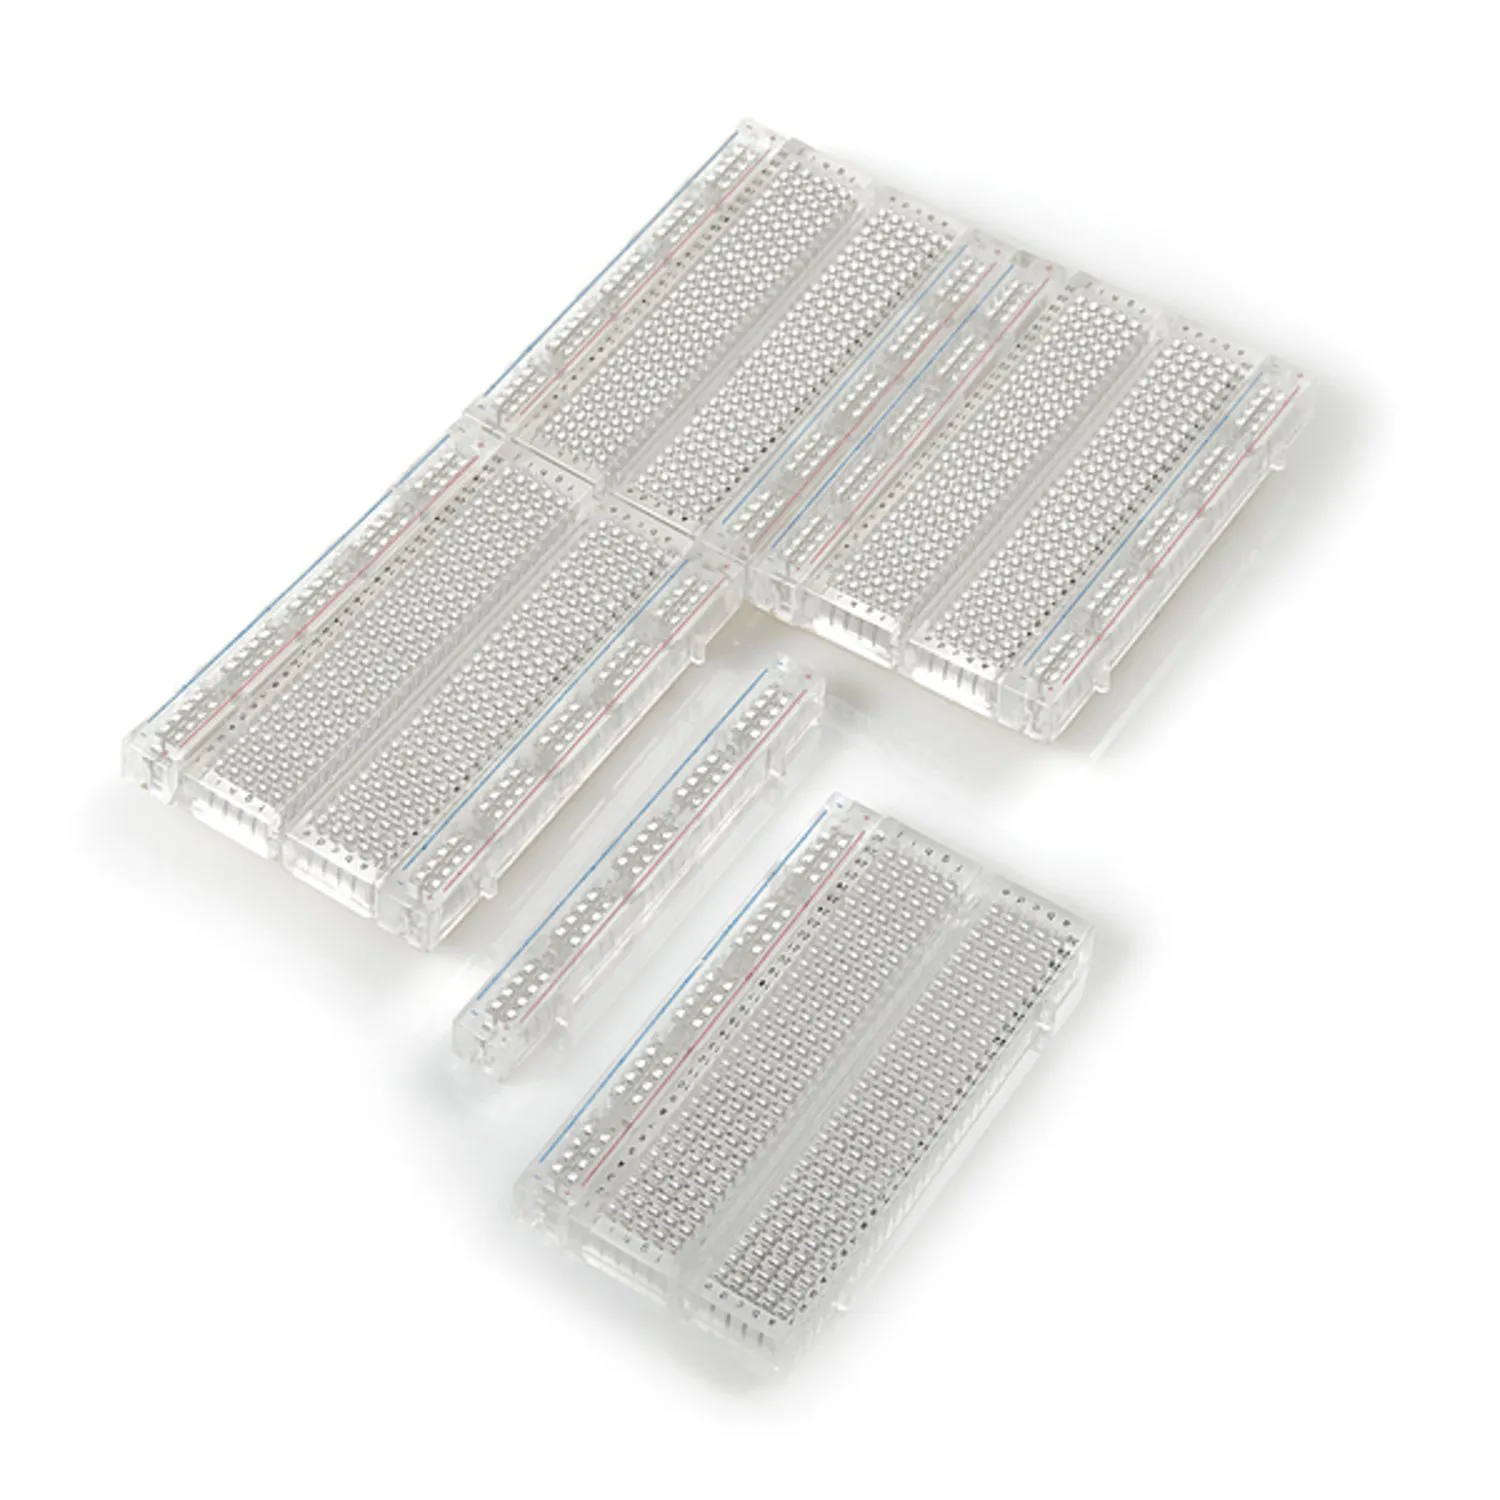 Photo of Breadboard - Translucent Self-Adhesive (Clear)